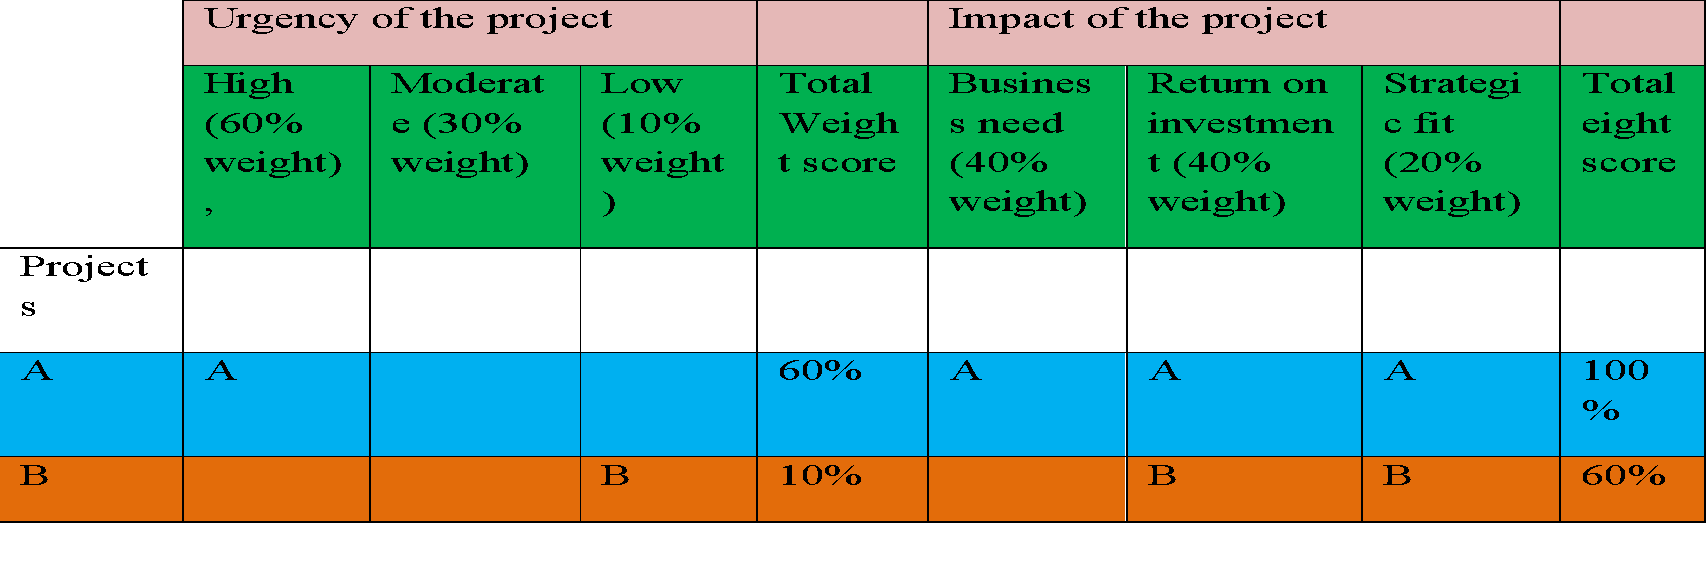 A Priority Matrix for Selecting between Projects A or B